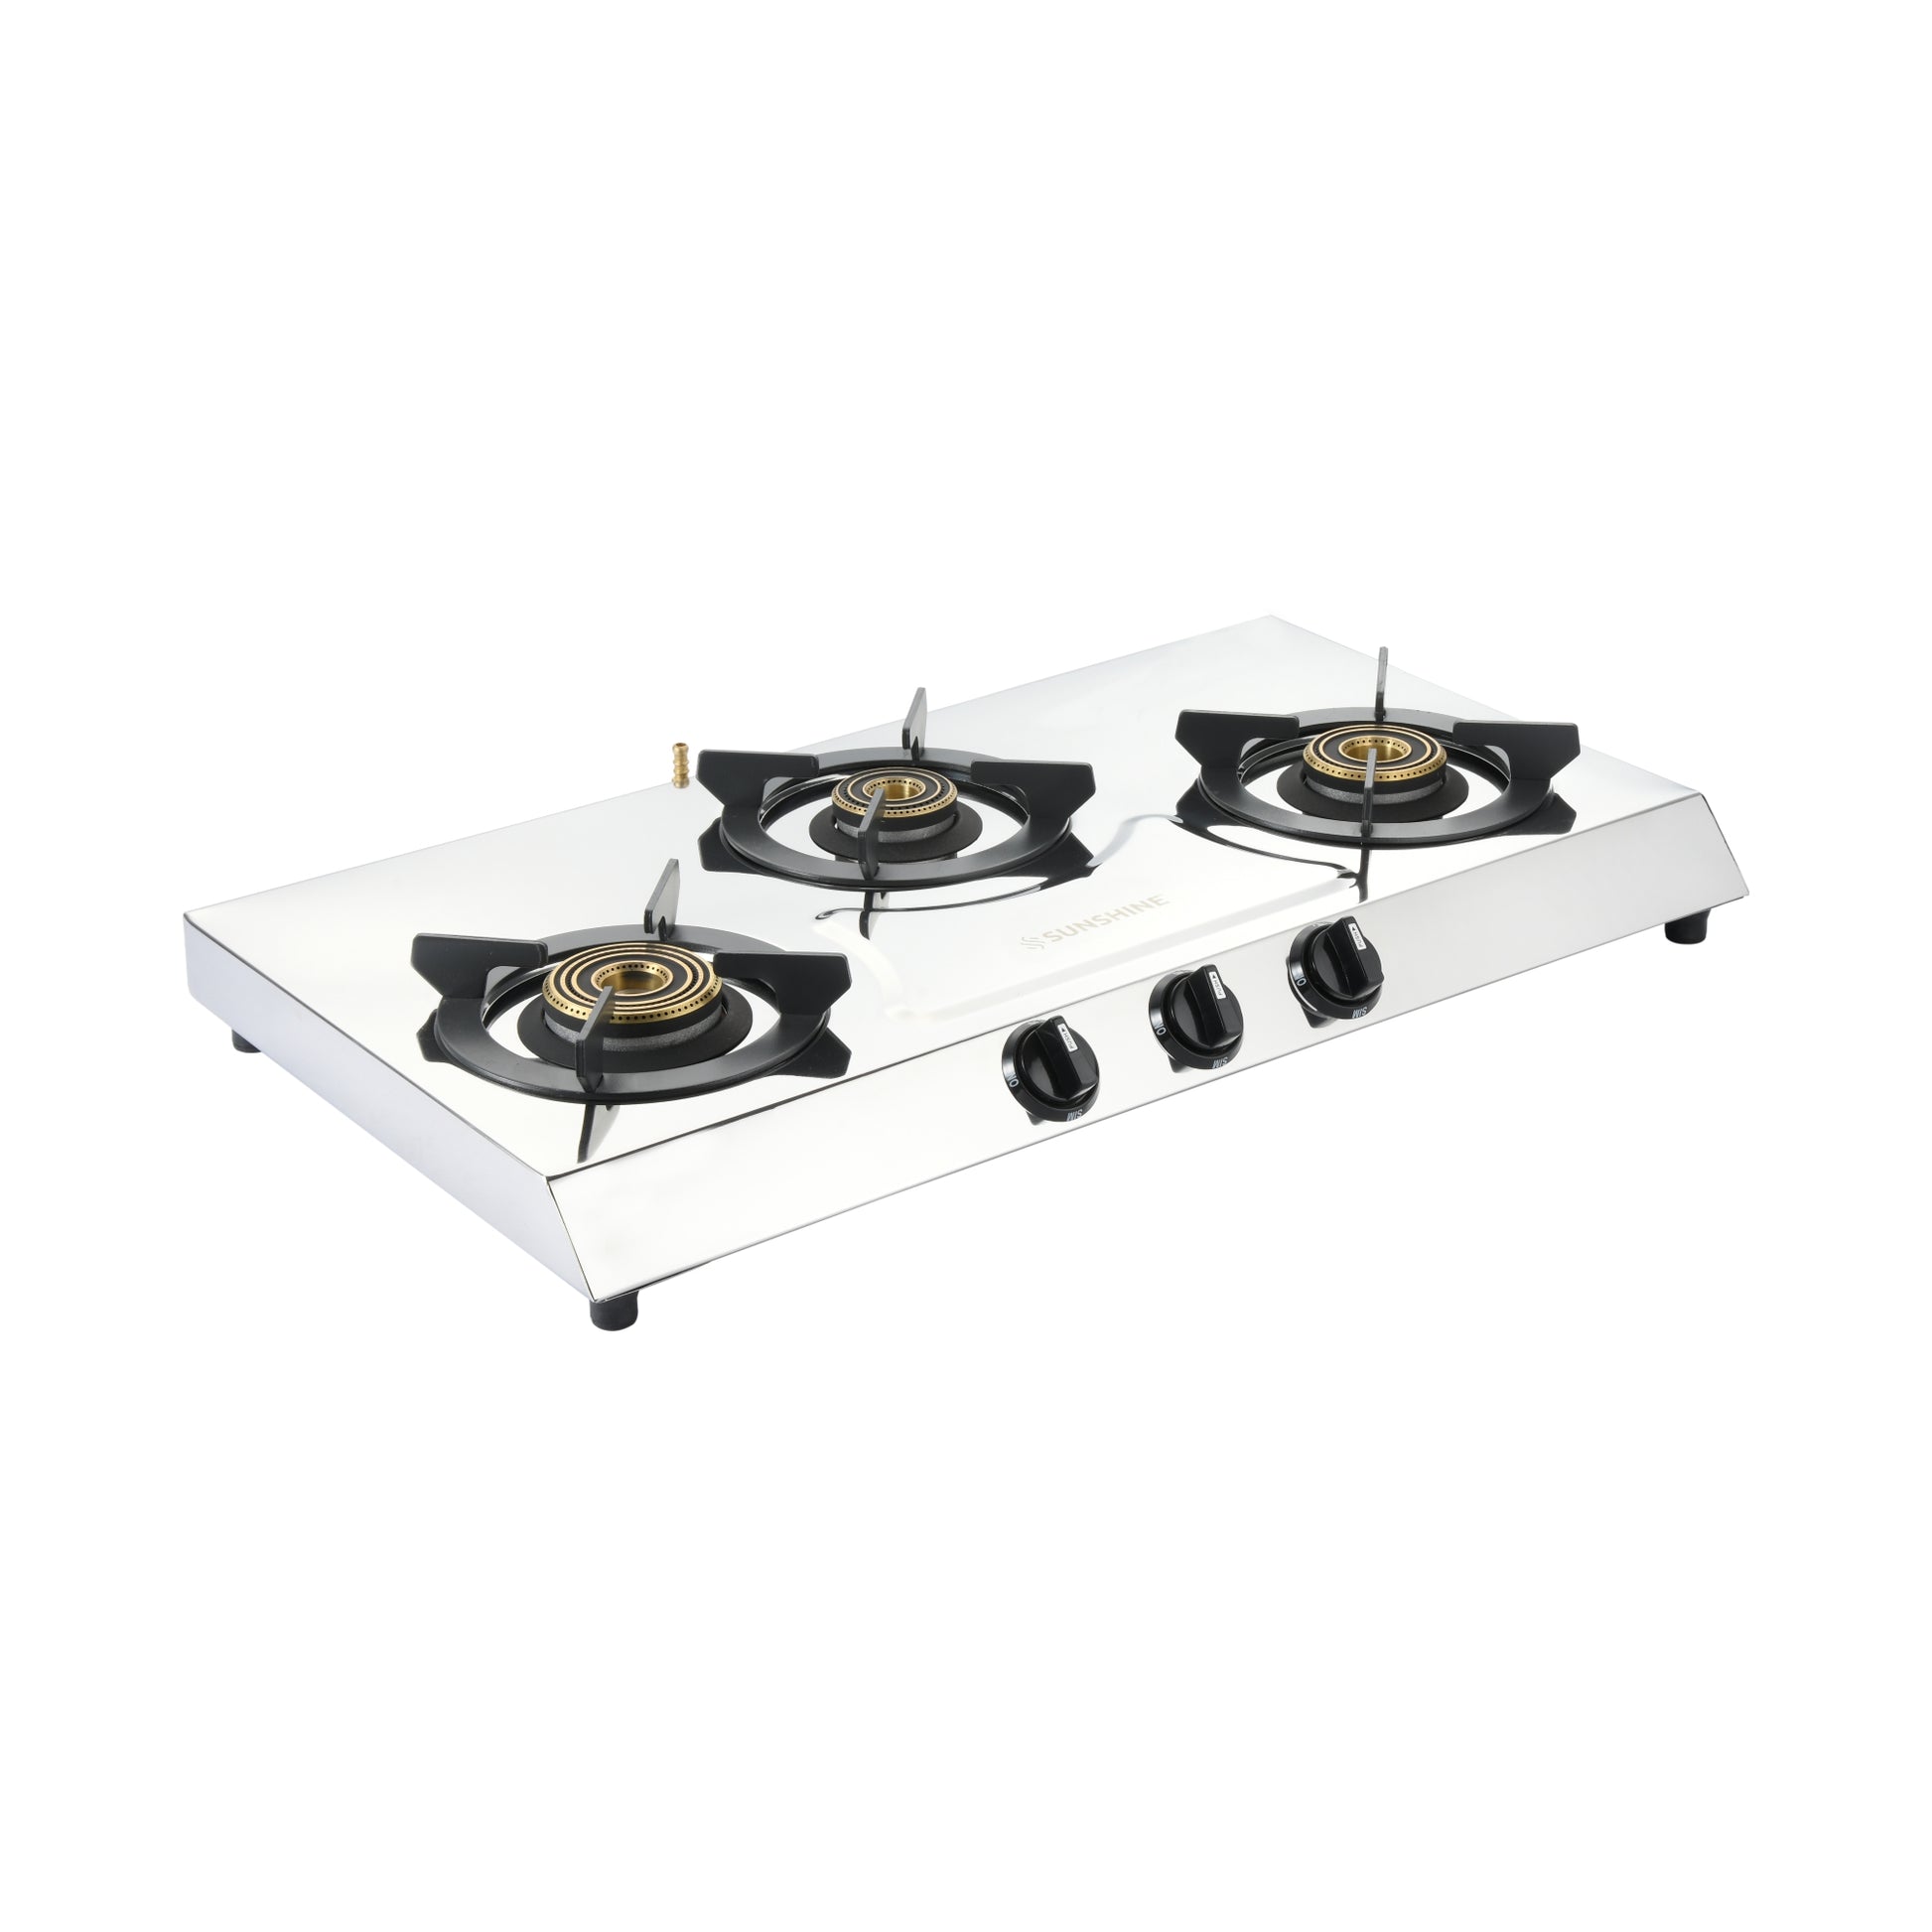 Sunshine Magistic Three Burner Stainless Steel Gas Stove Manual Ignition